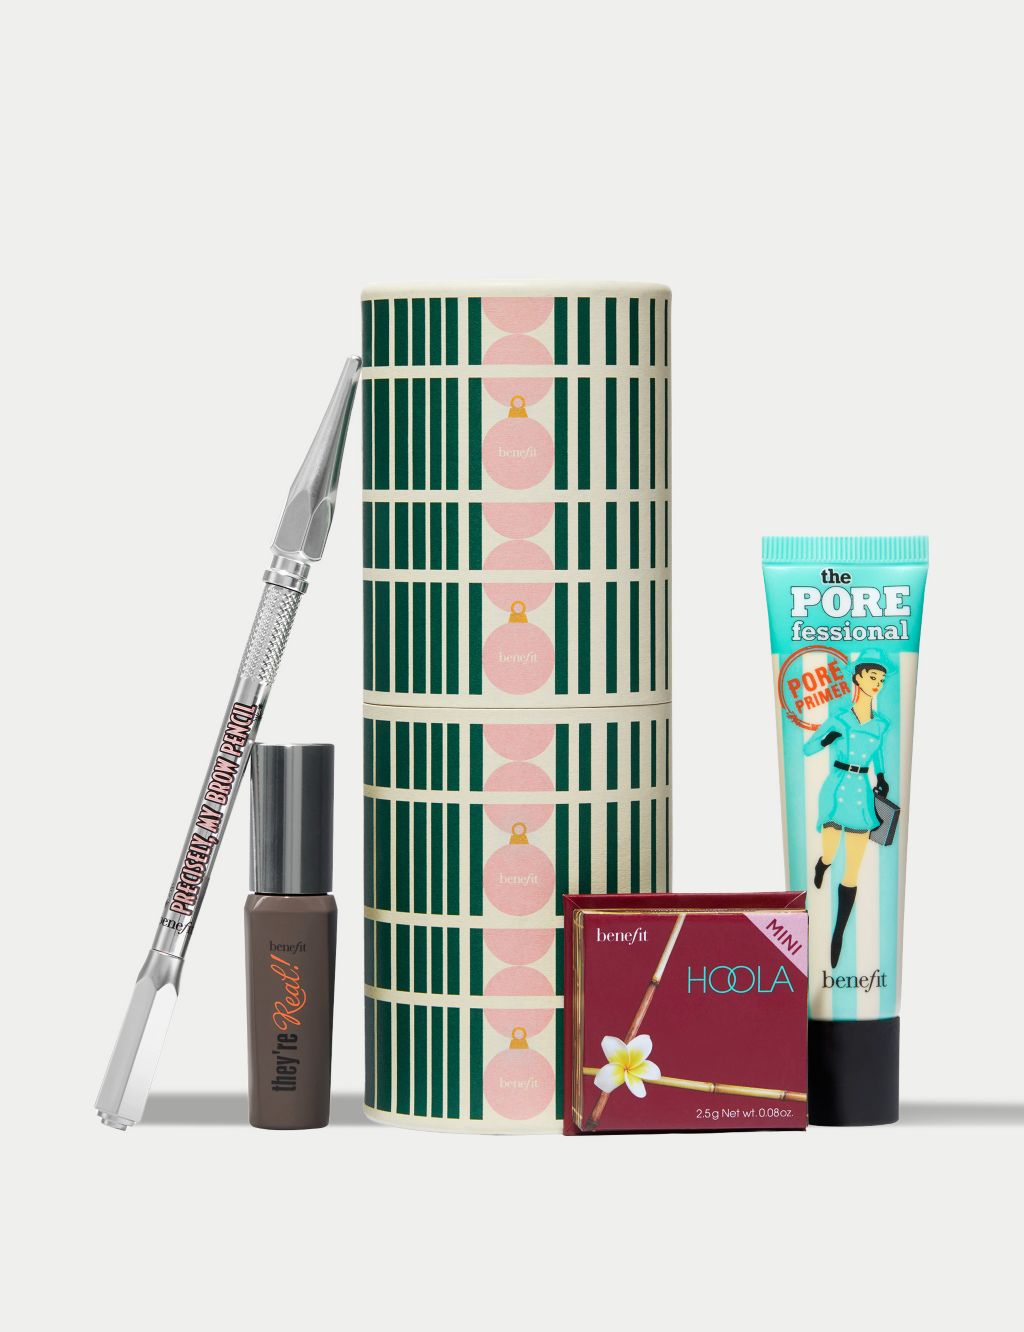 Giftin Goodies They're Real Mascara, Hoola Bronzer, Porefessional Primer & Precisely My Brow Pencil Gift Set (Worth £84.50)